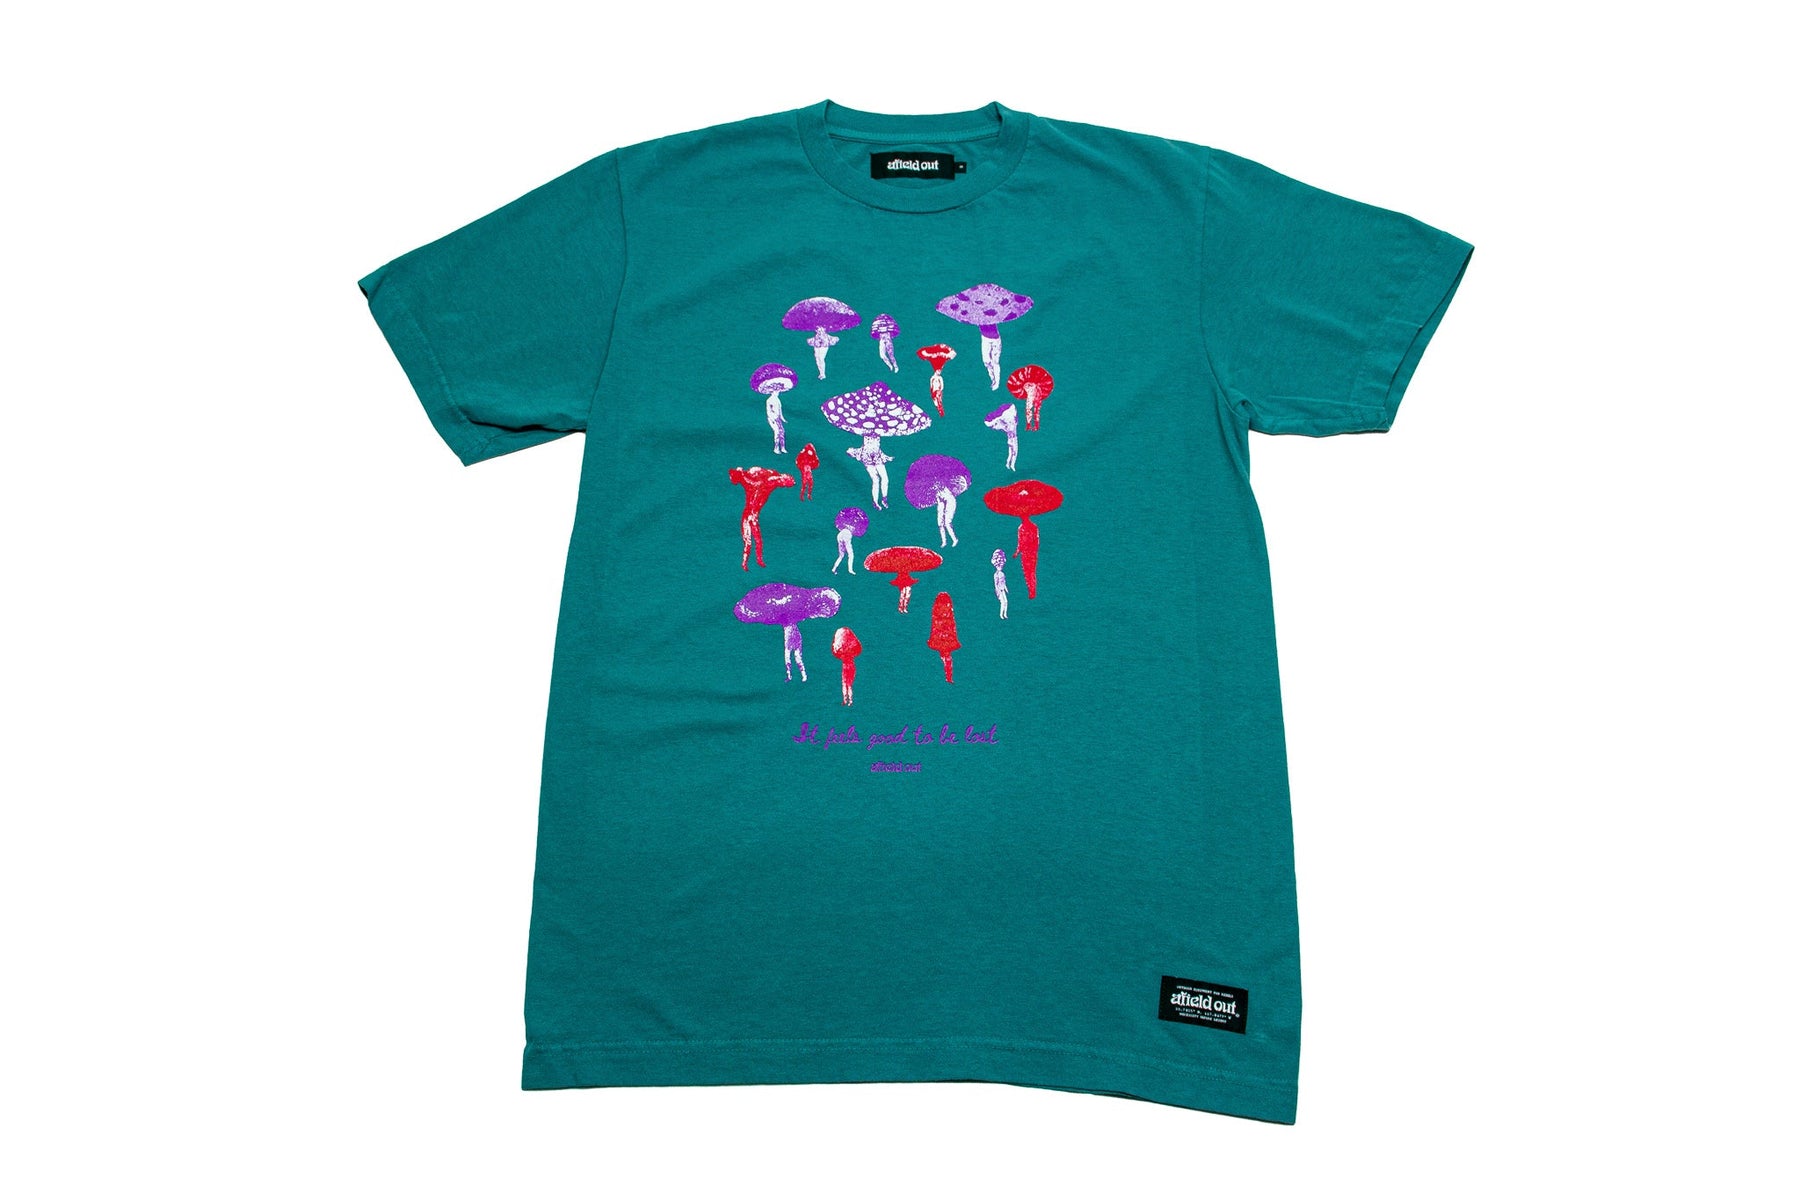 Afield Out Daydream Tee Shirt "Teal"